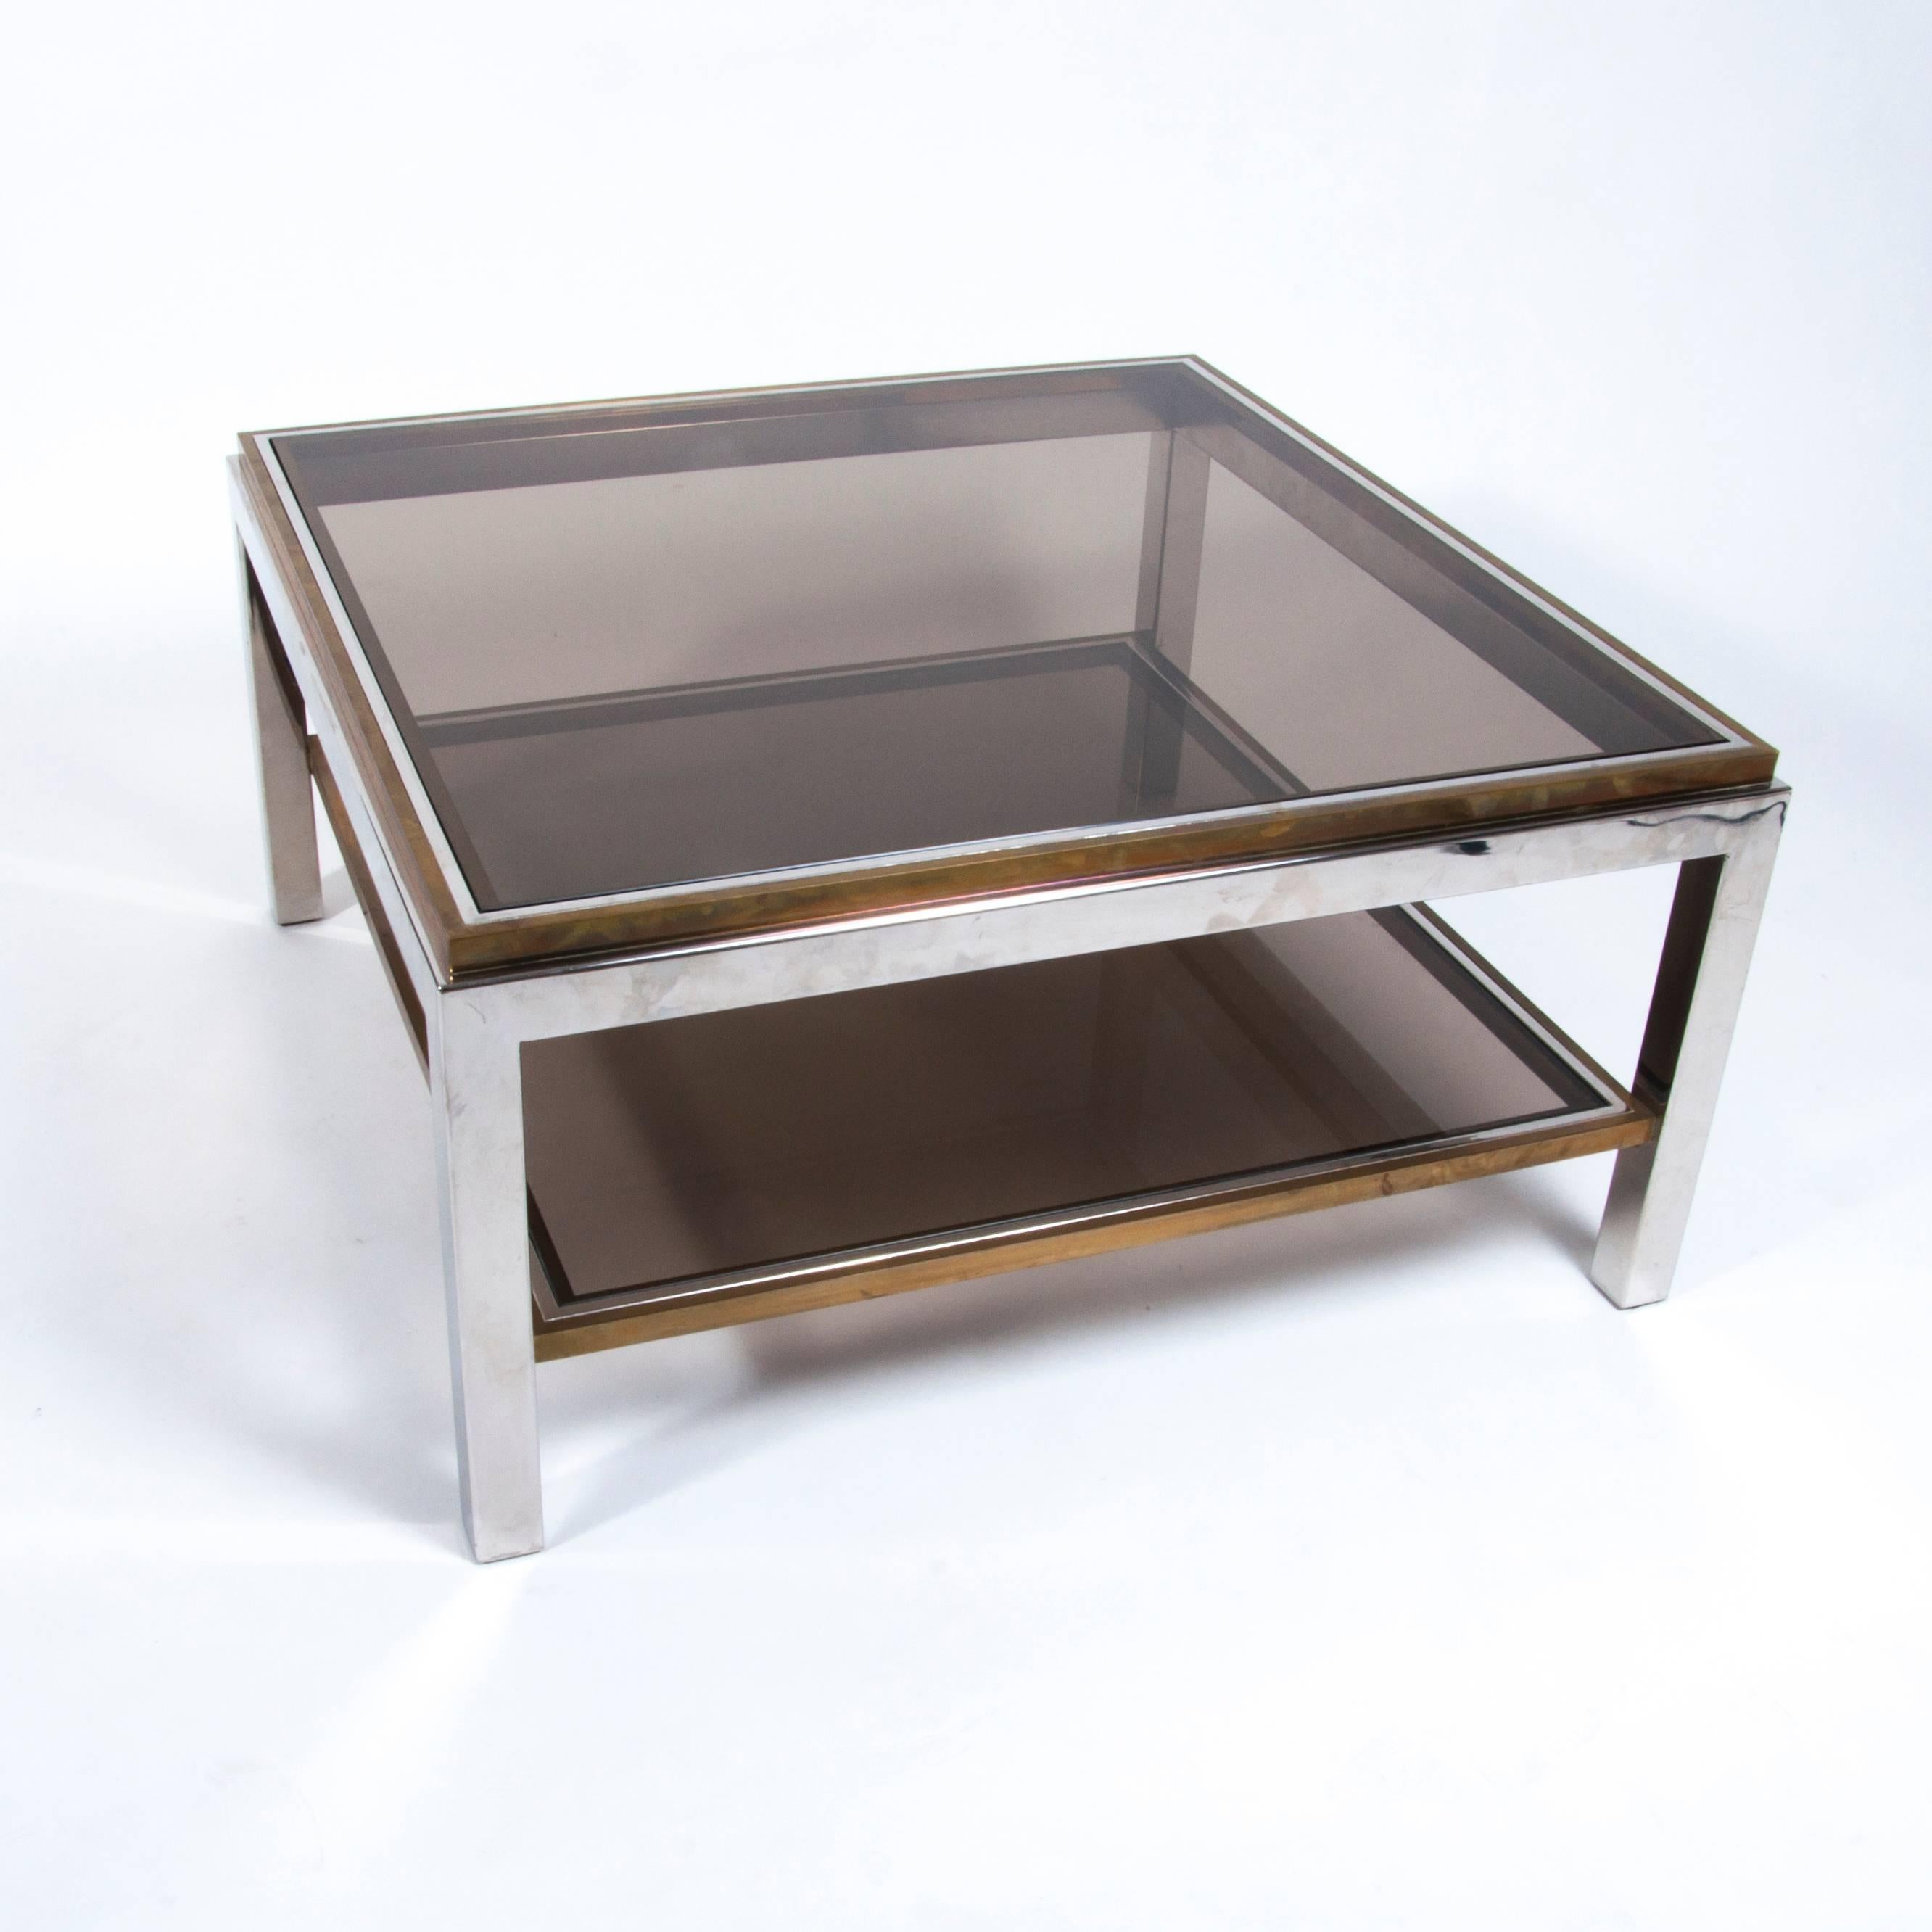 Small two-tiered coffee table designed by Willy Rizzo. 
The combination of chrome, brass and smoked glass is very stylish.